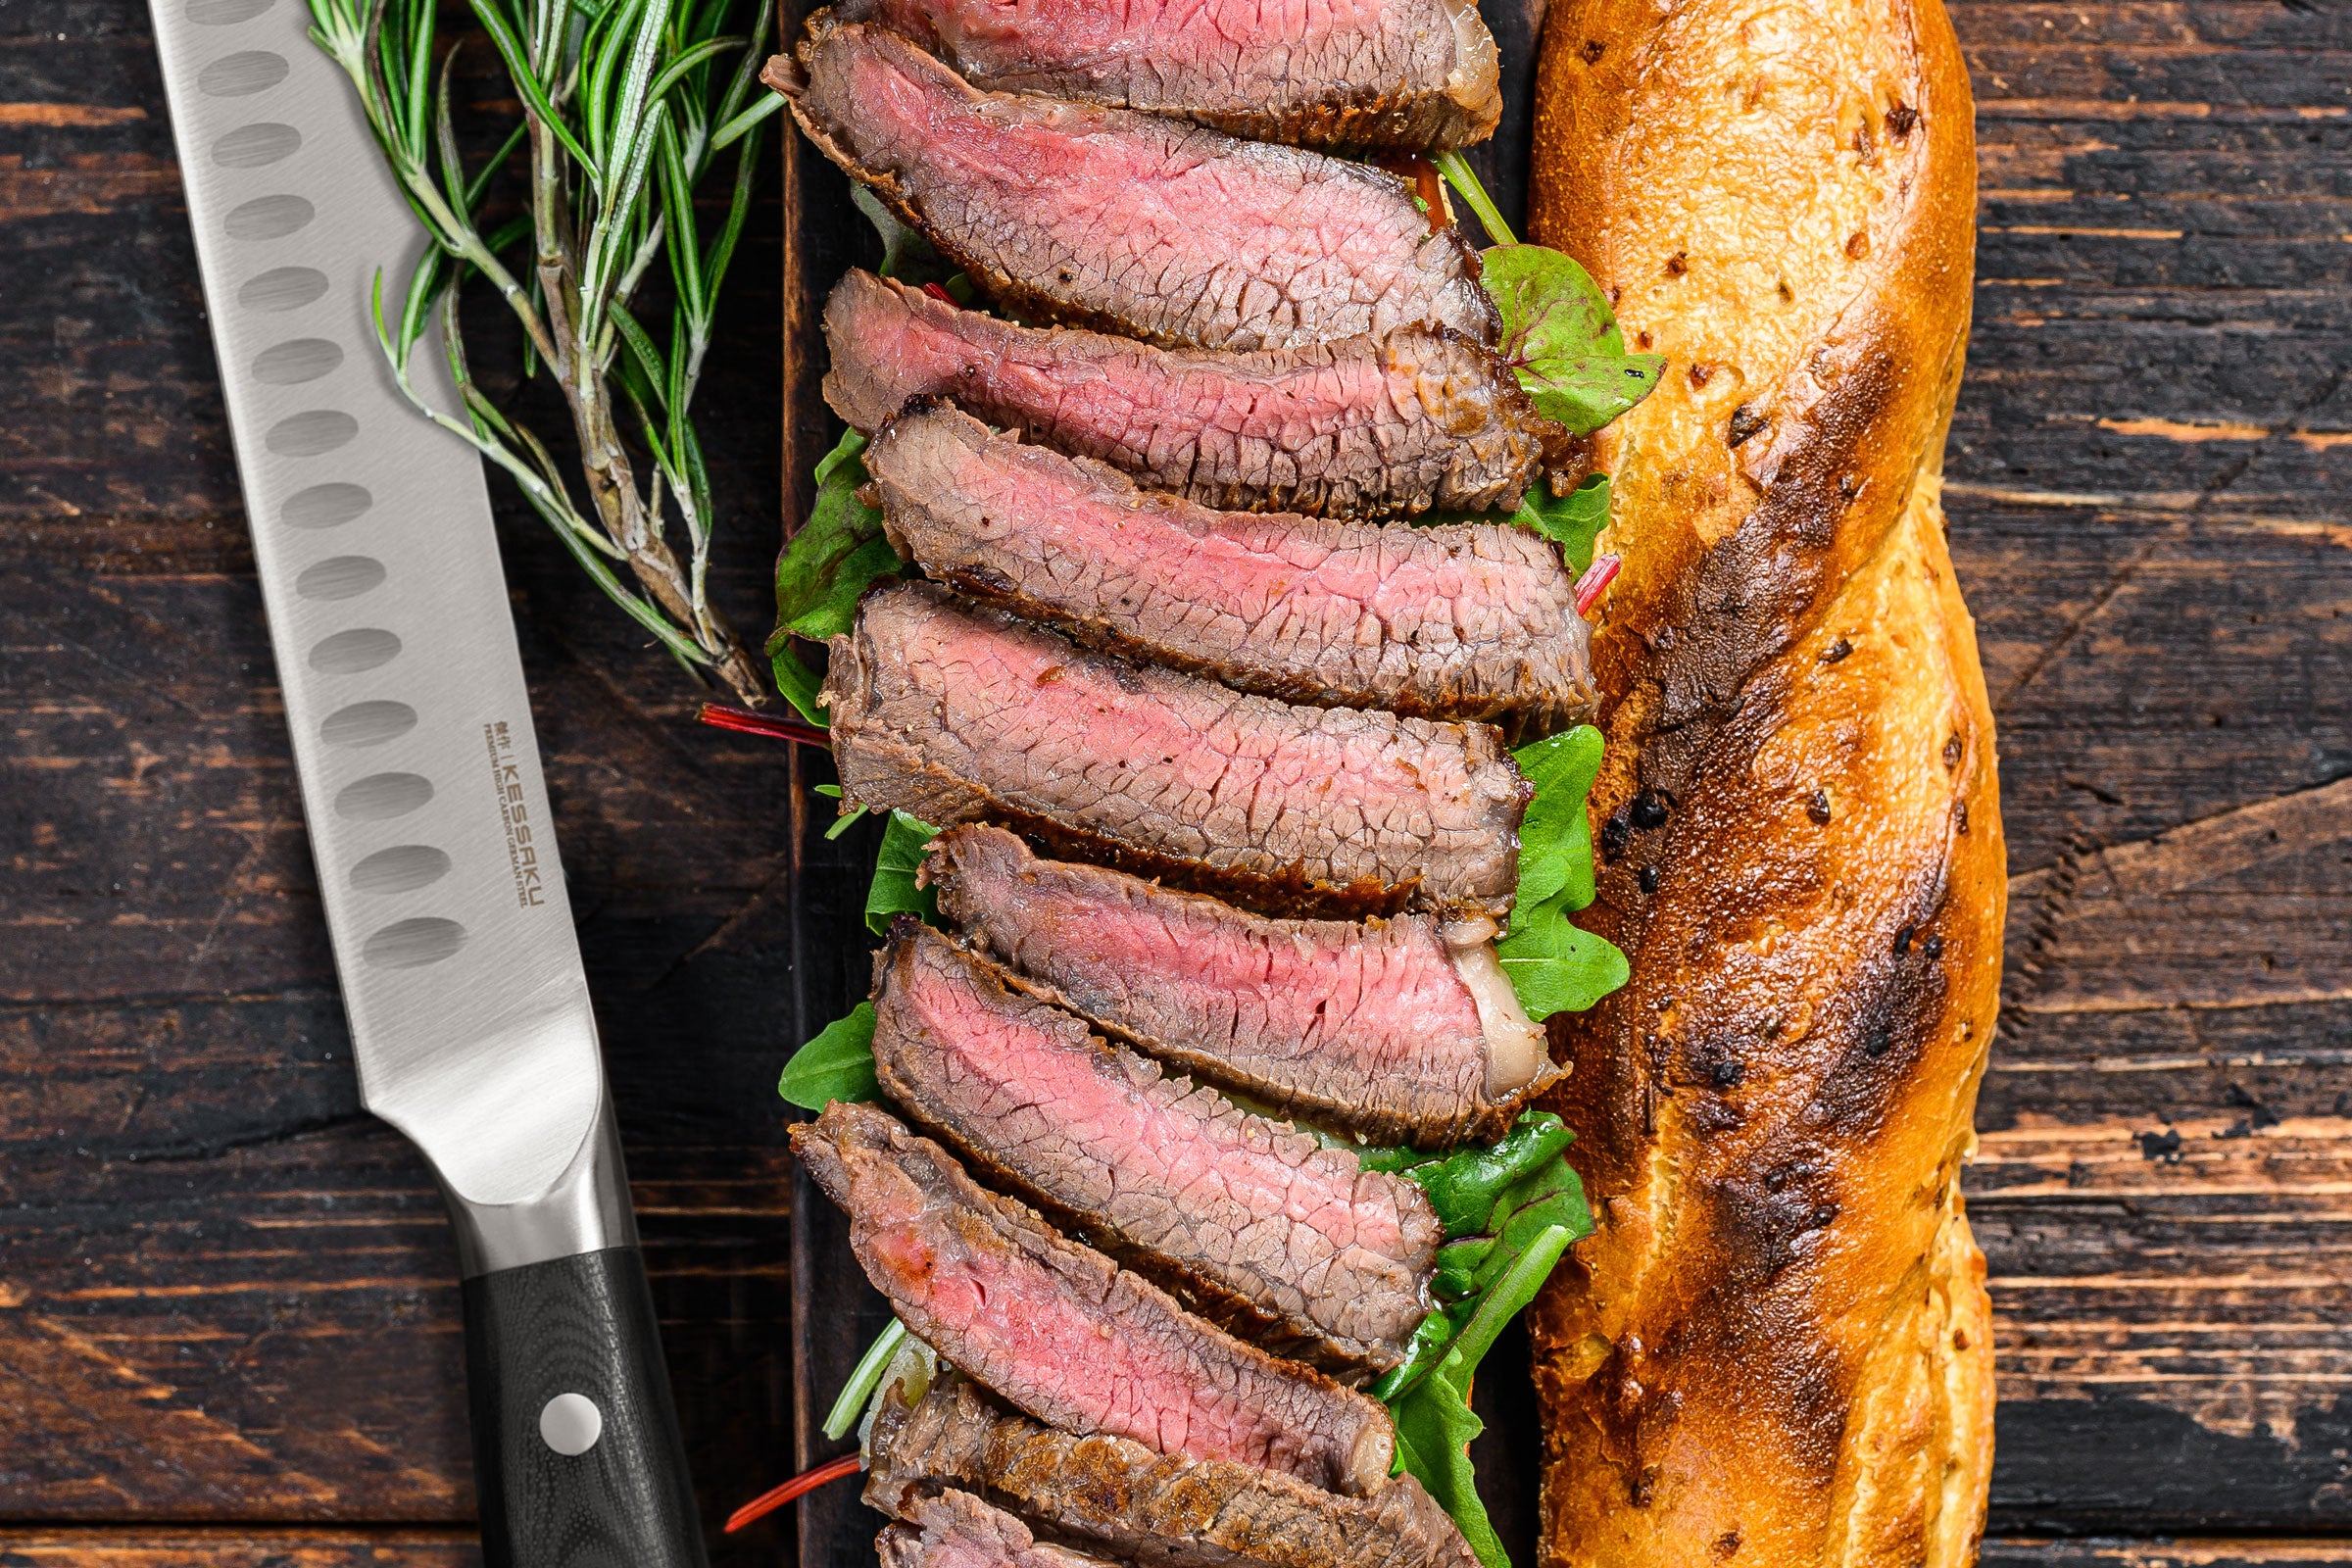 The Dynasty Carving Knife next to a sandwich with juicy steak slices.